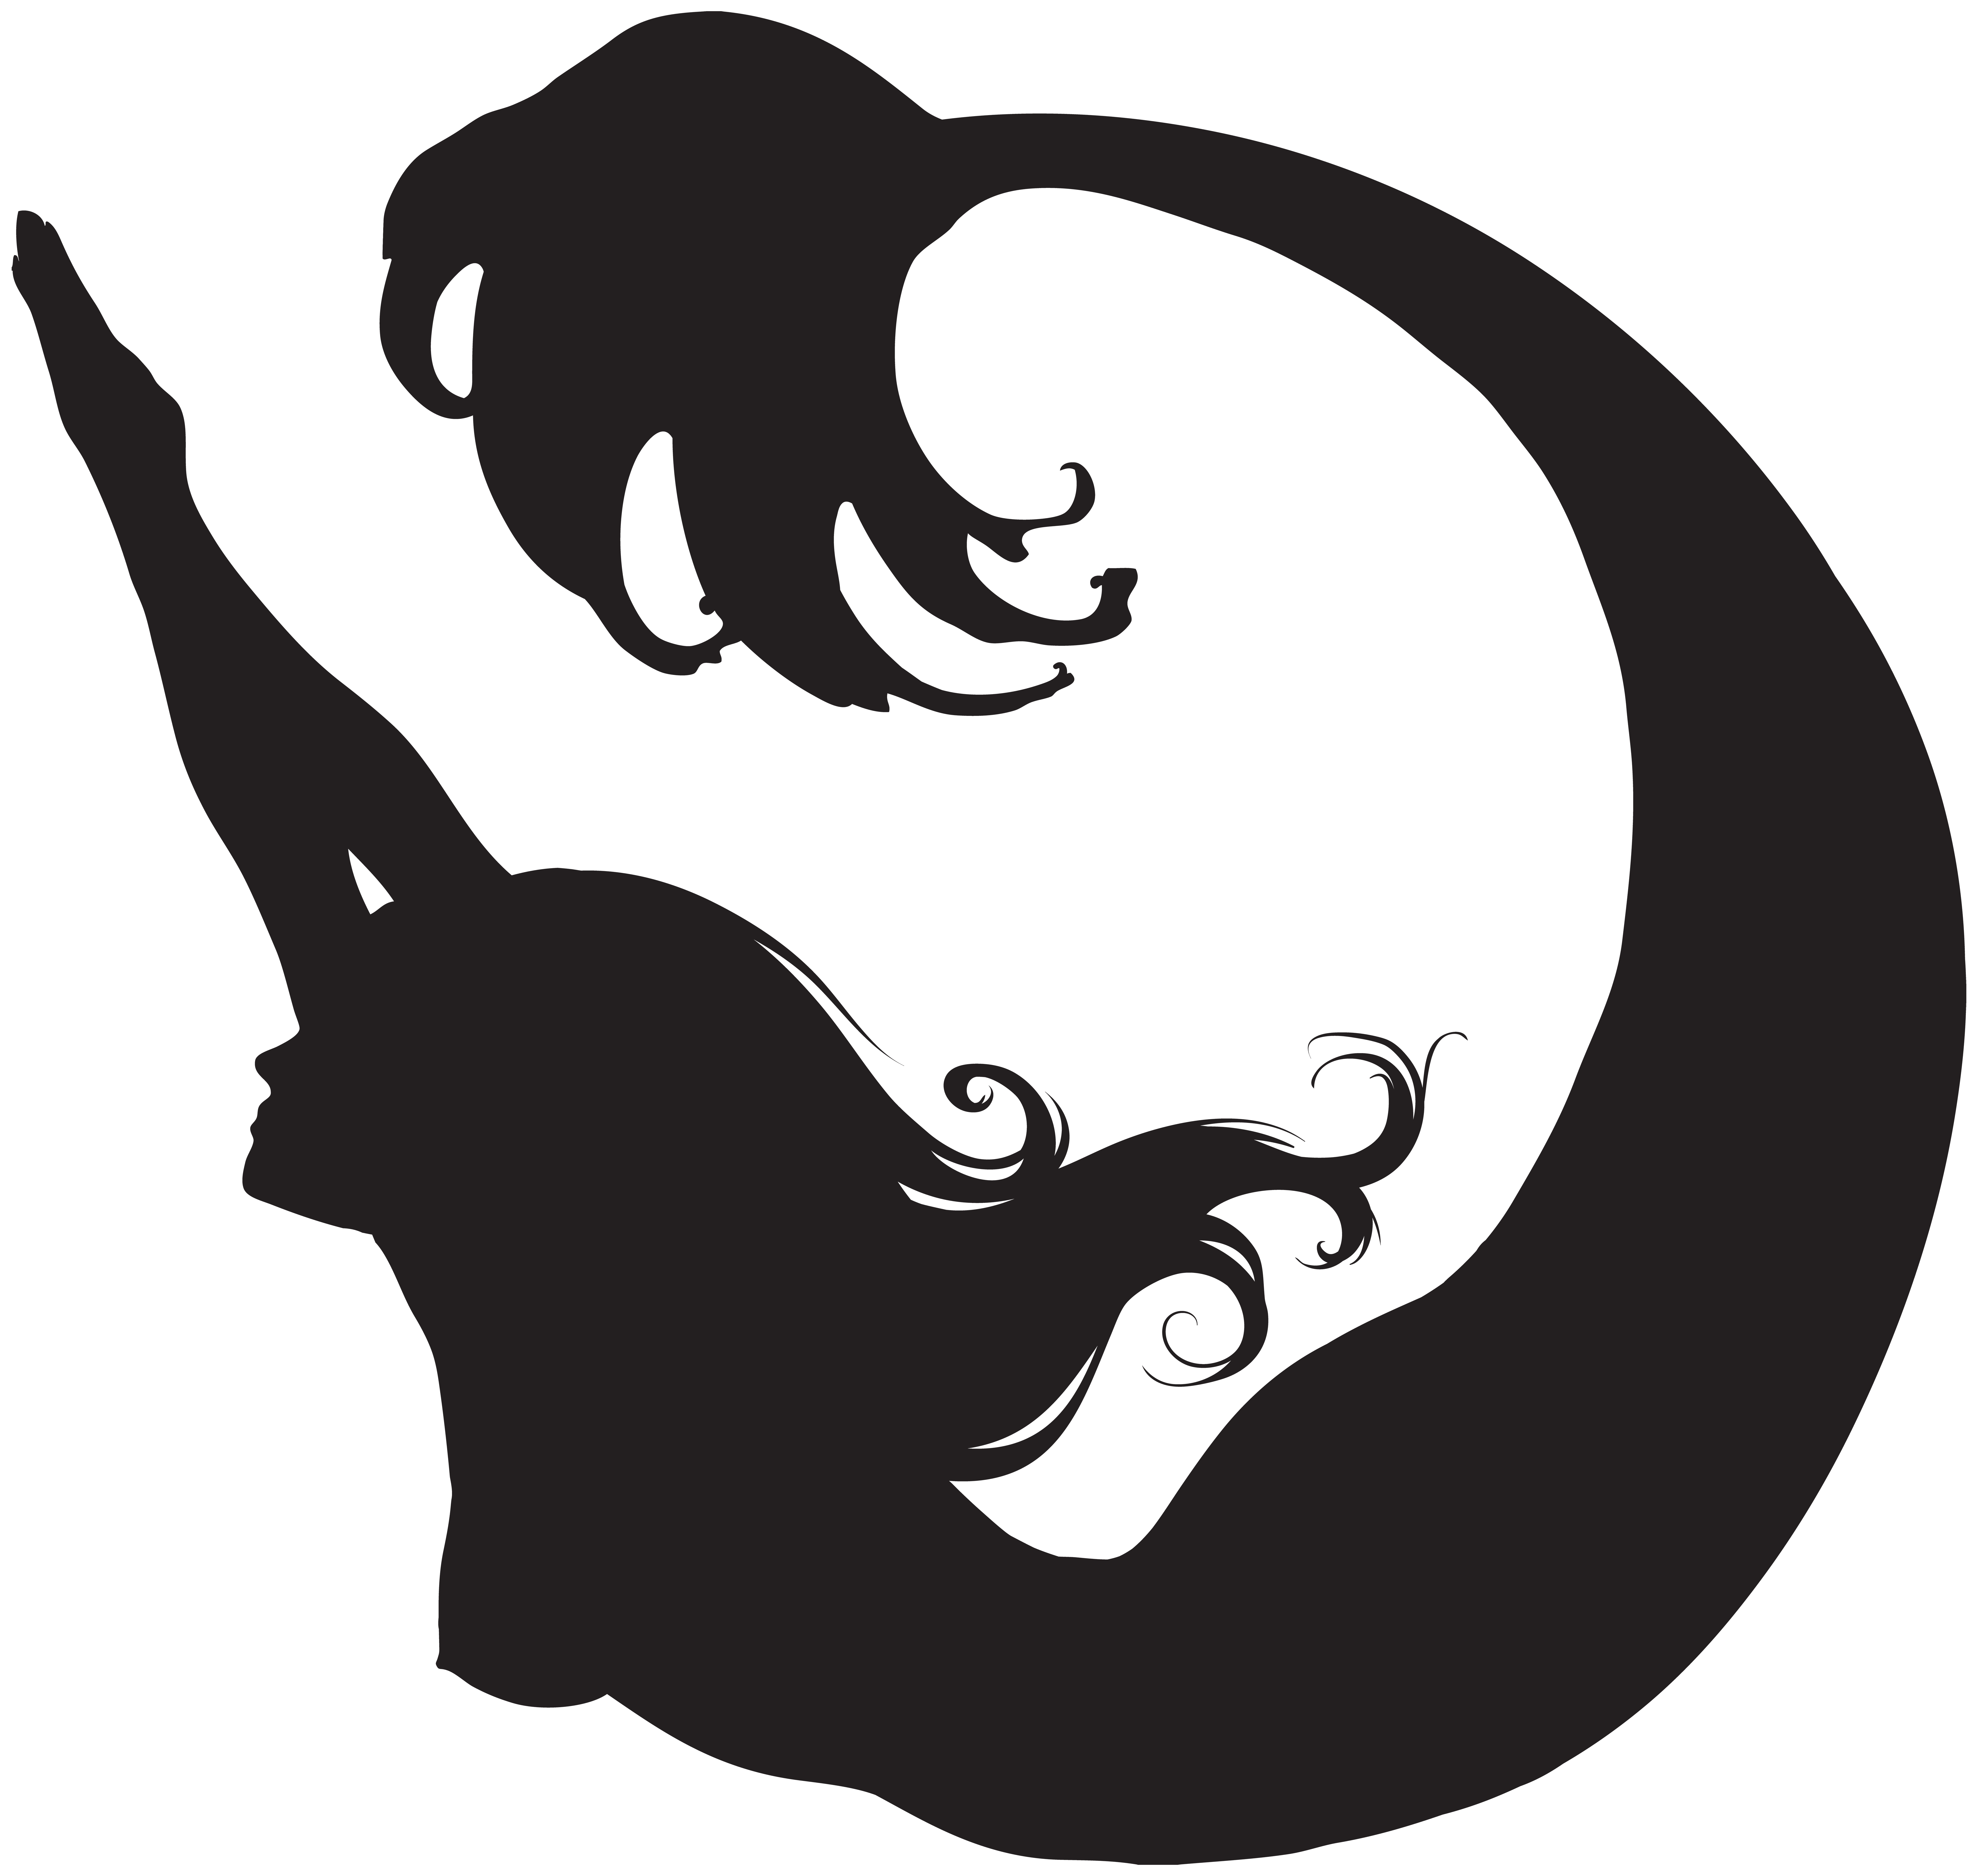 Clipart rock mermaid. Swimming silhouette png clip